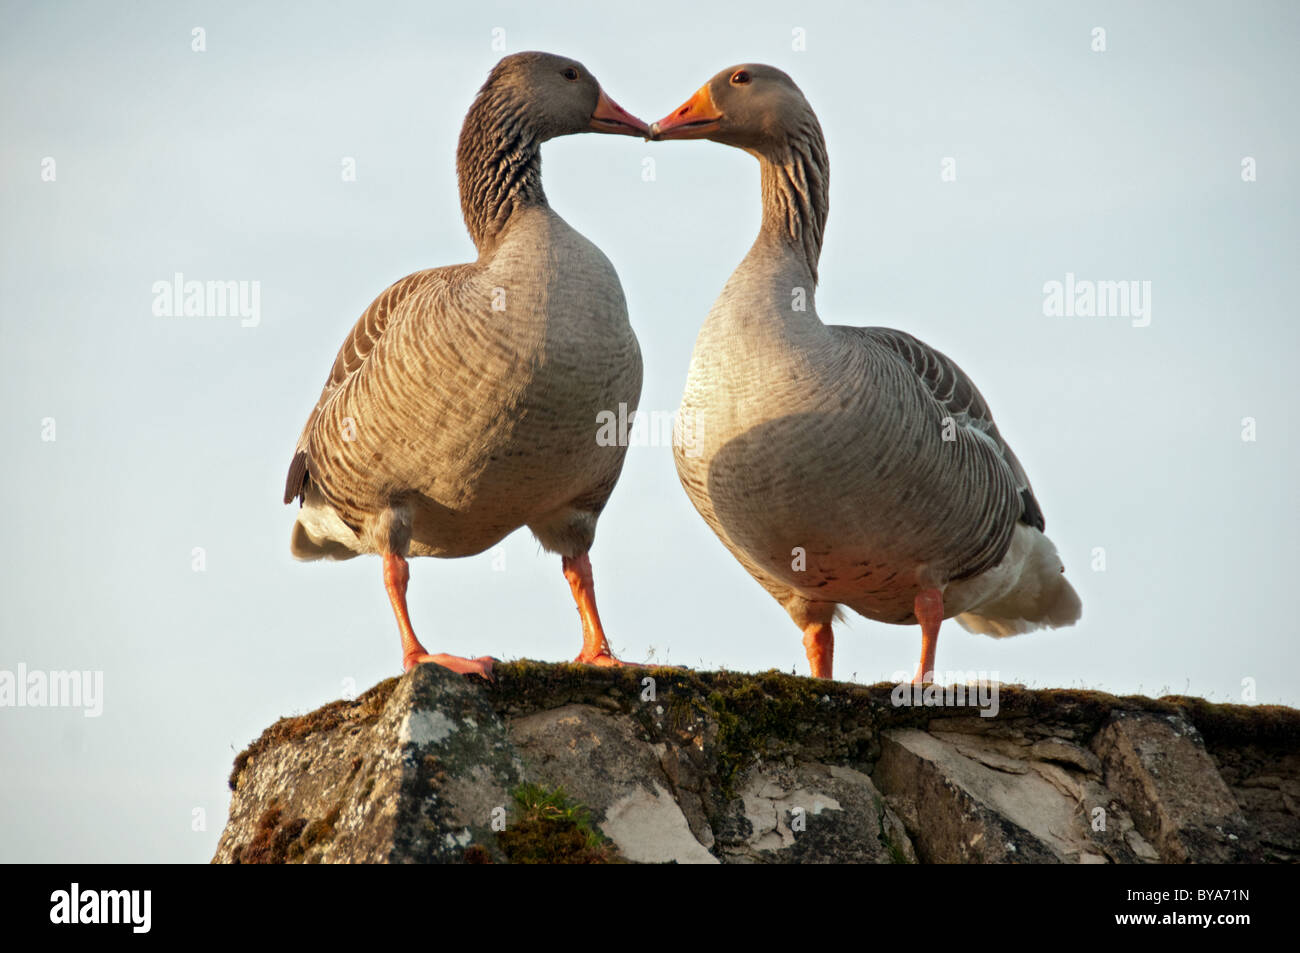 Two Geese rubbing beaks together standing on stone wall. Stock Photo